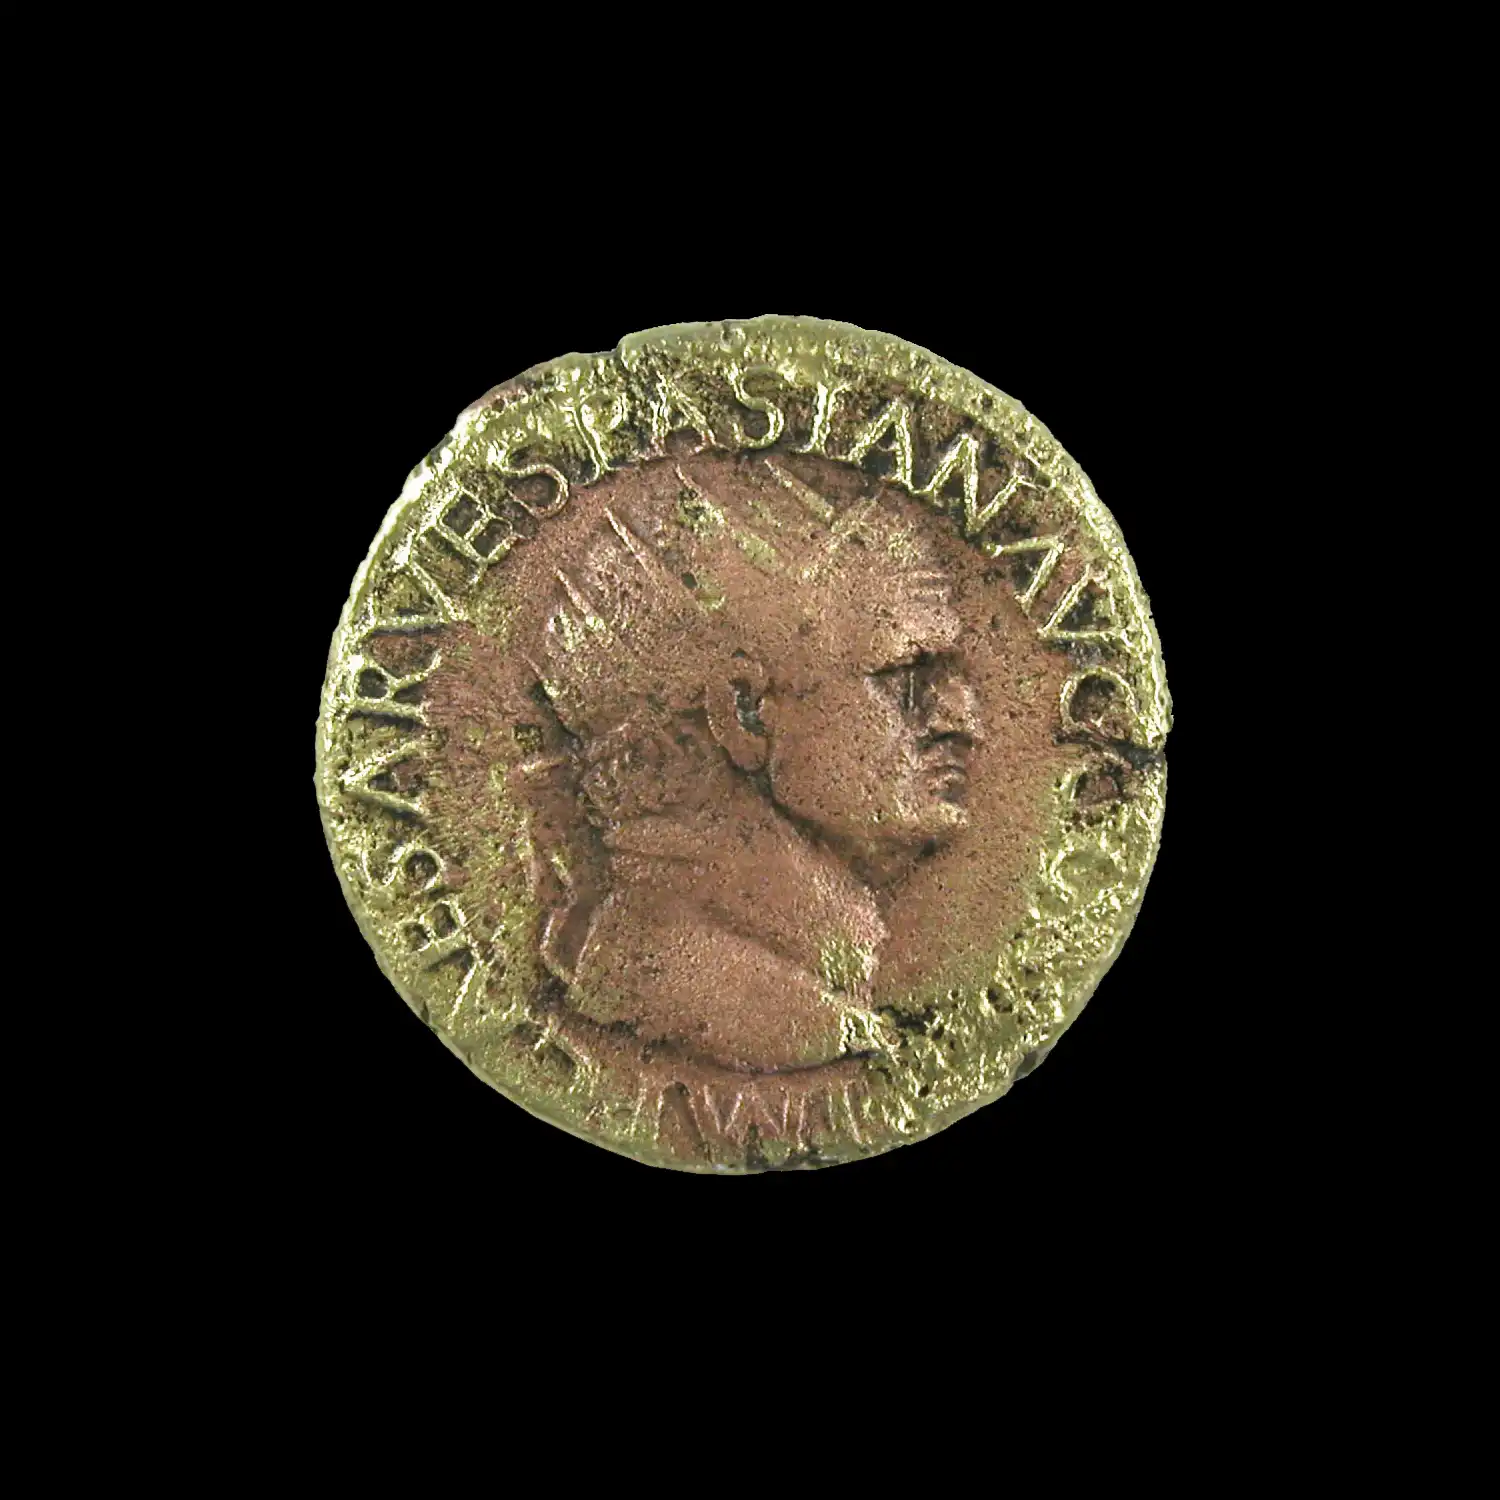 A Roman Dupondius coin of Vespasian, minted in AD 72–73.